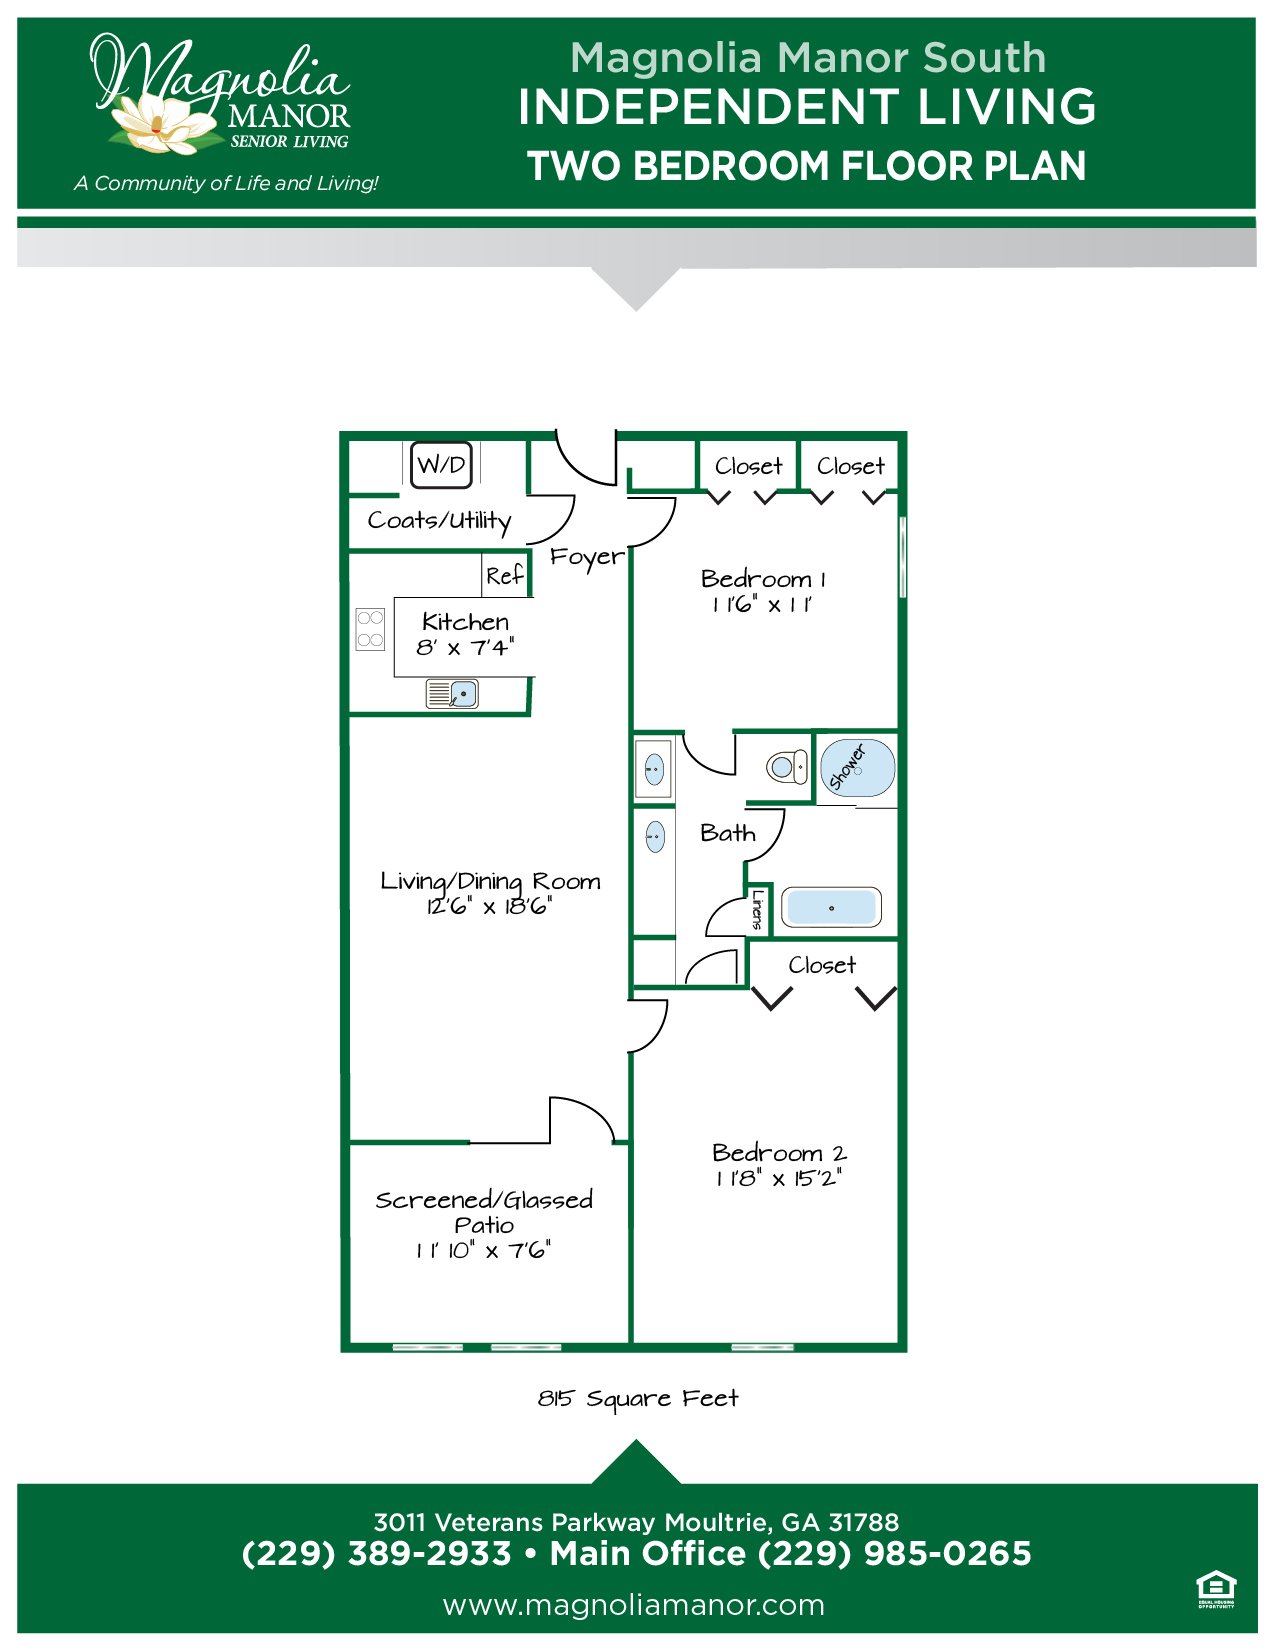 00344 MOULTRIE IL Floor Plan Two Bedroom-01